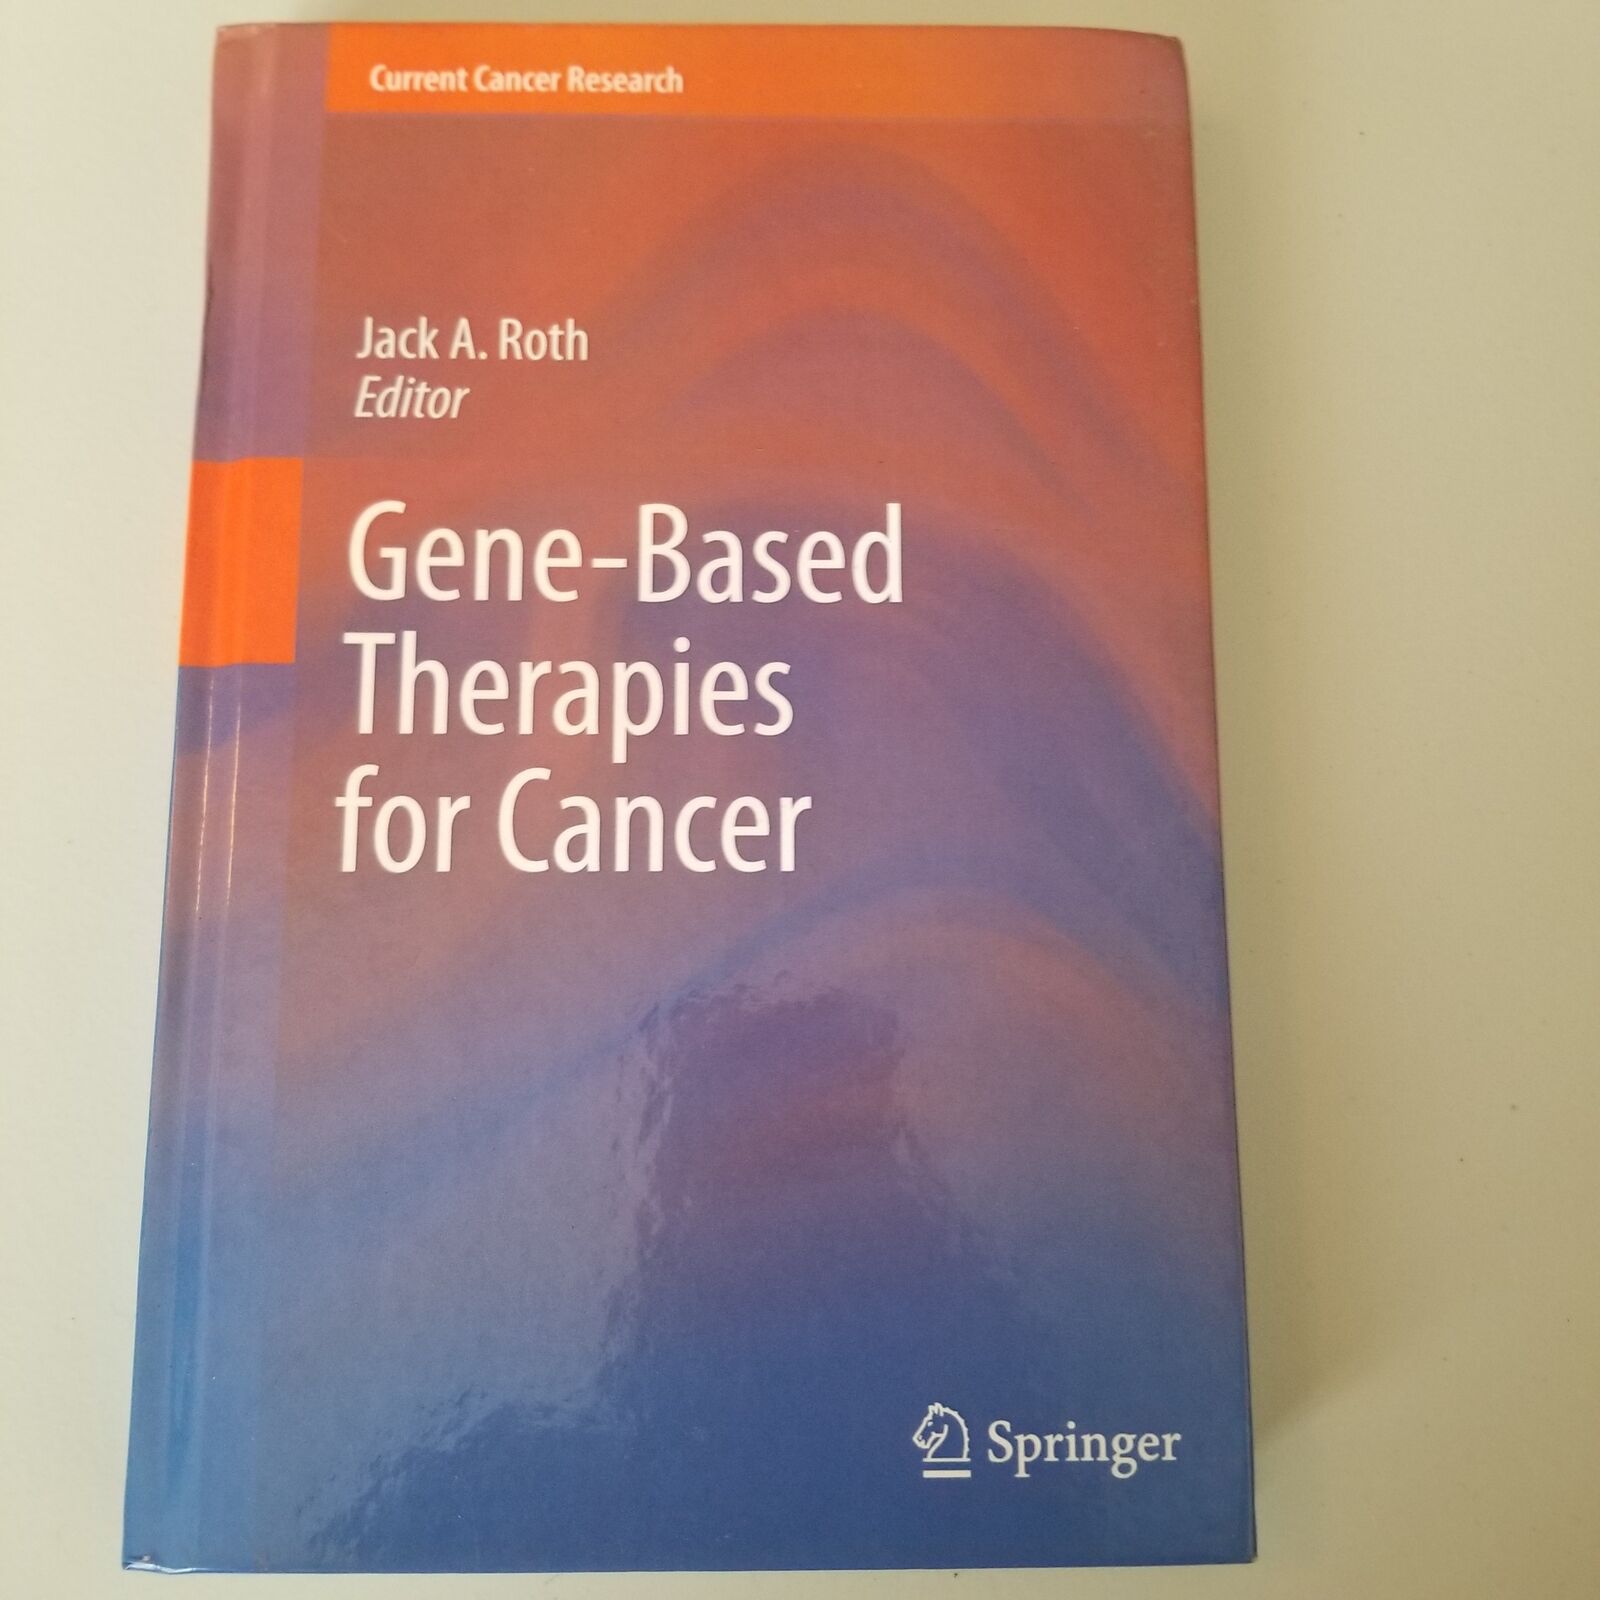 Gene-Based Therapies for Cancer (Current Cancer Research)